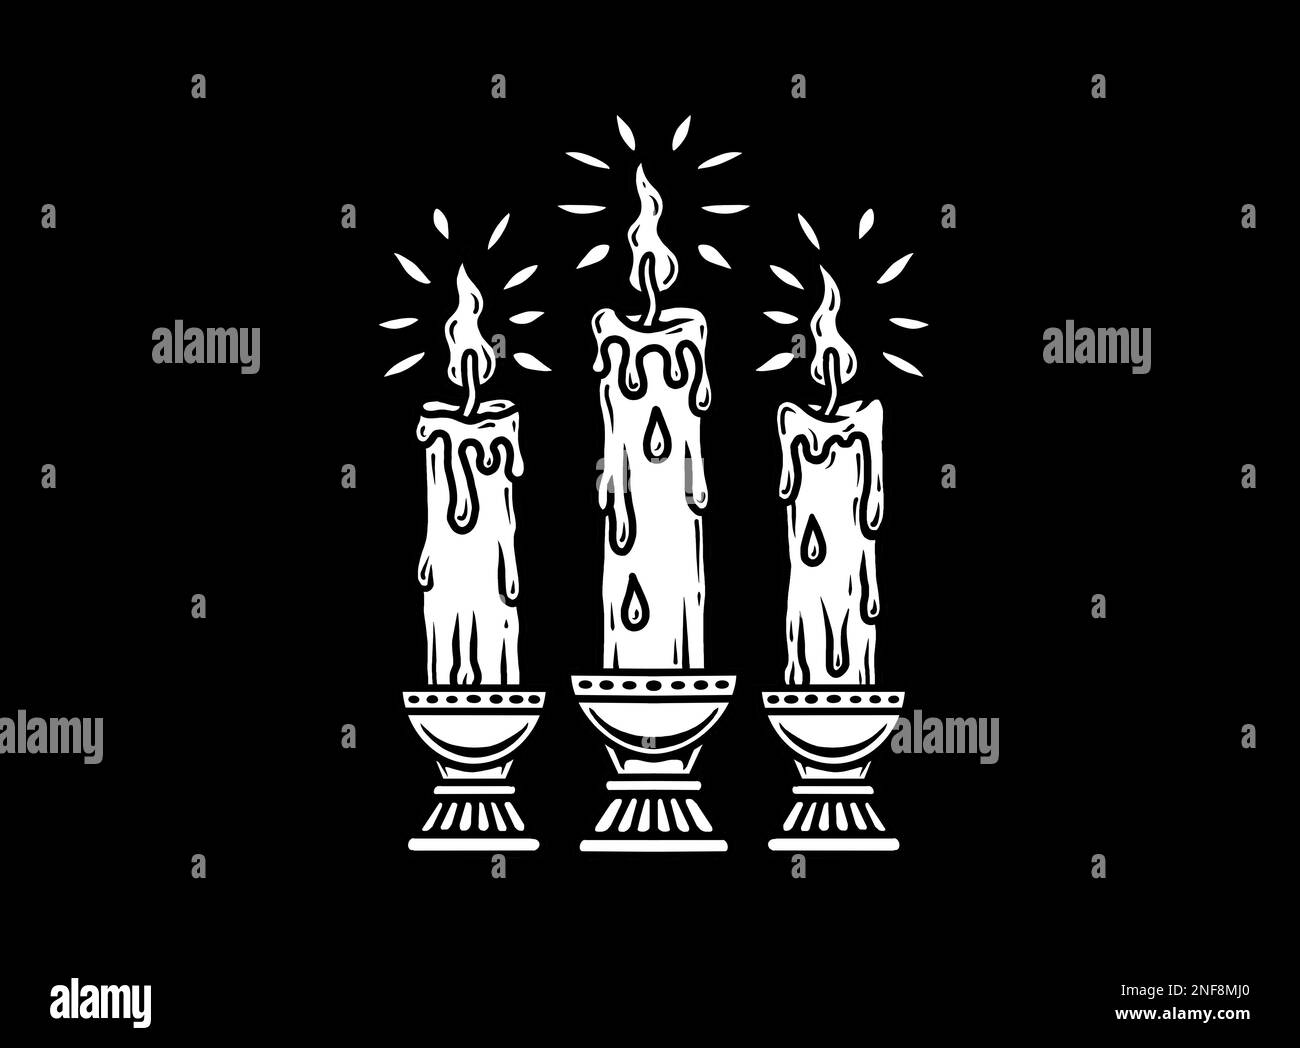 Old school traditional tattoo inspired cool graphic design illustration candles in black and white on black background Stock Photo